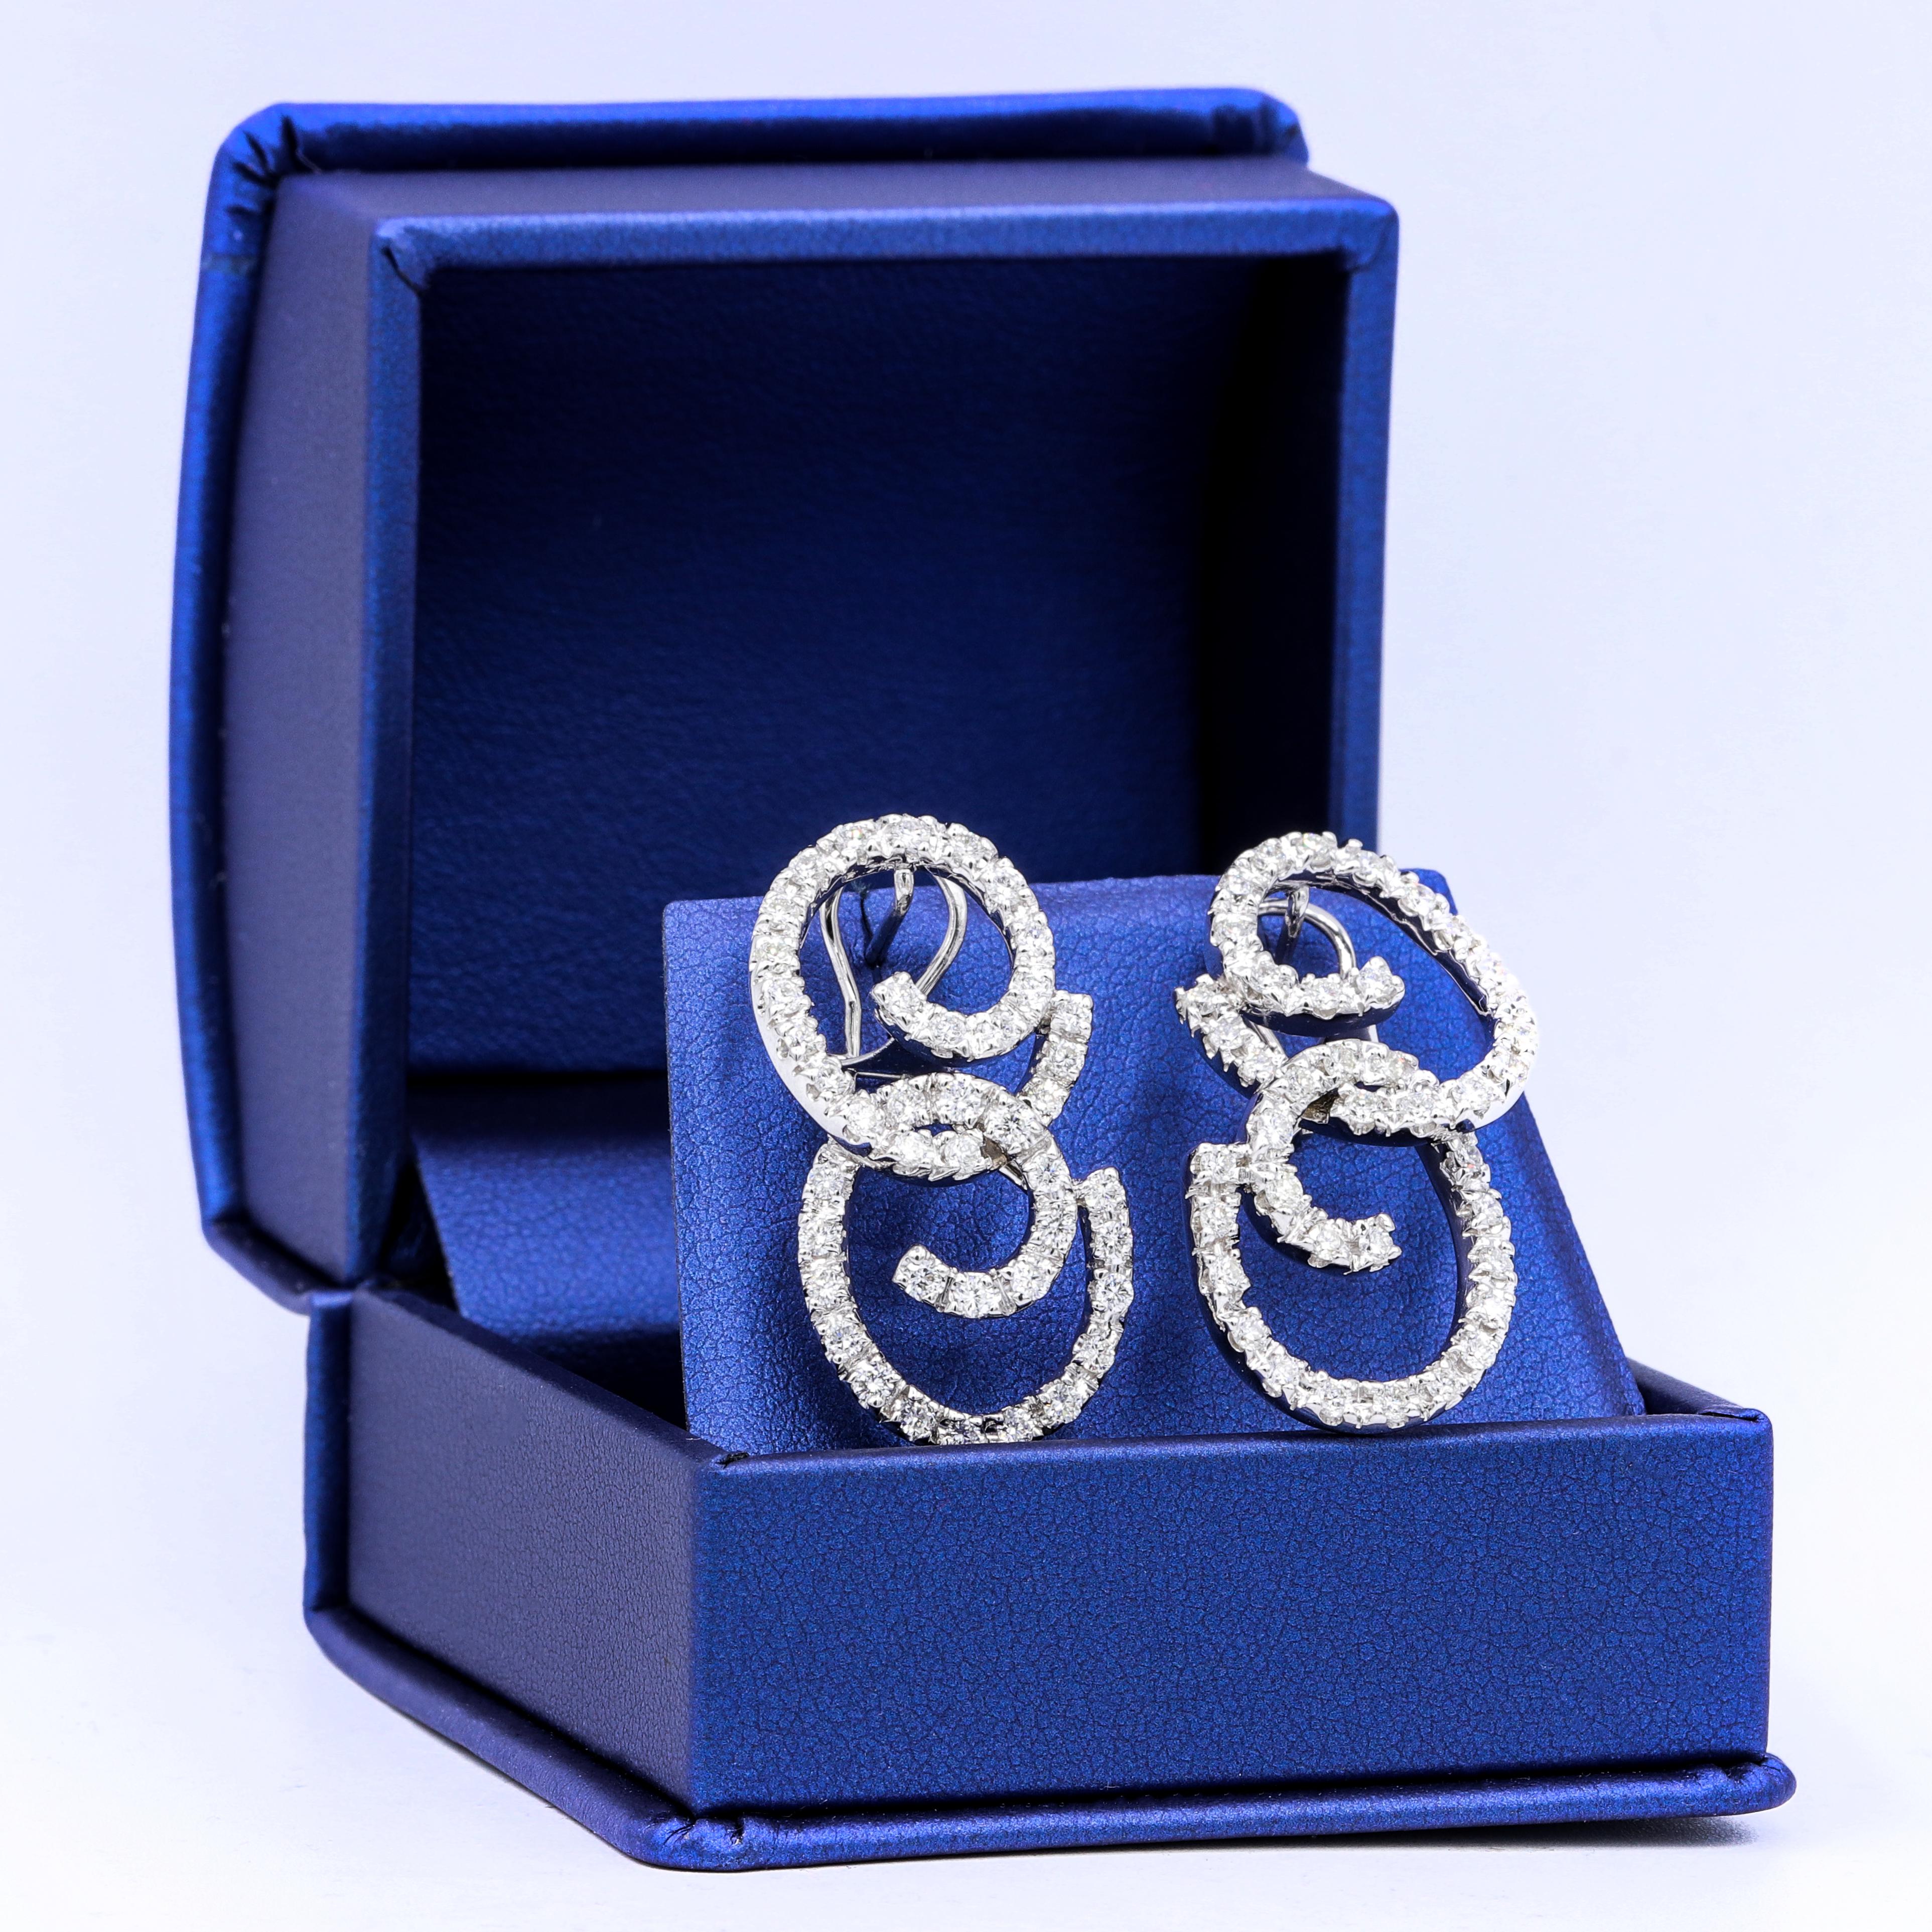 White Gold fashion earrings, features 3.50 ct of diamonds